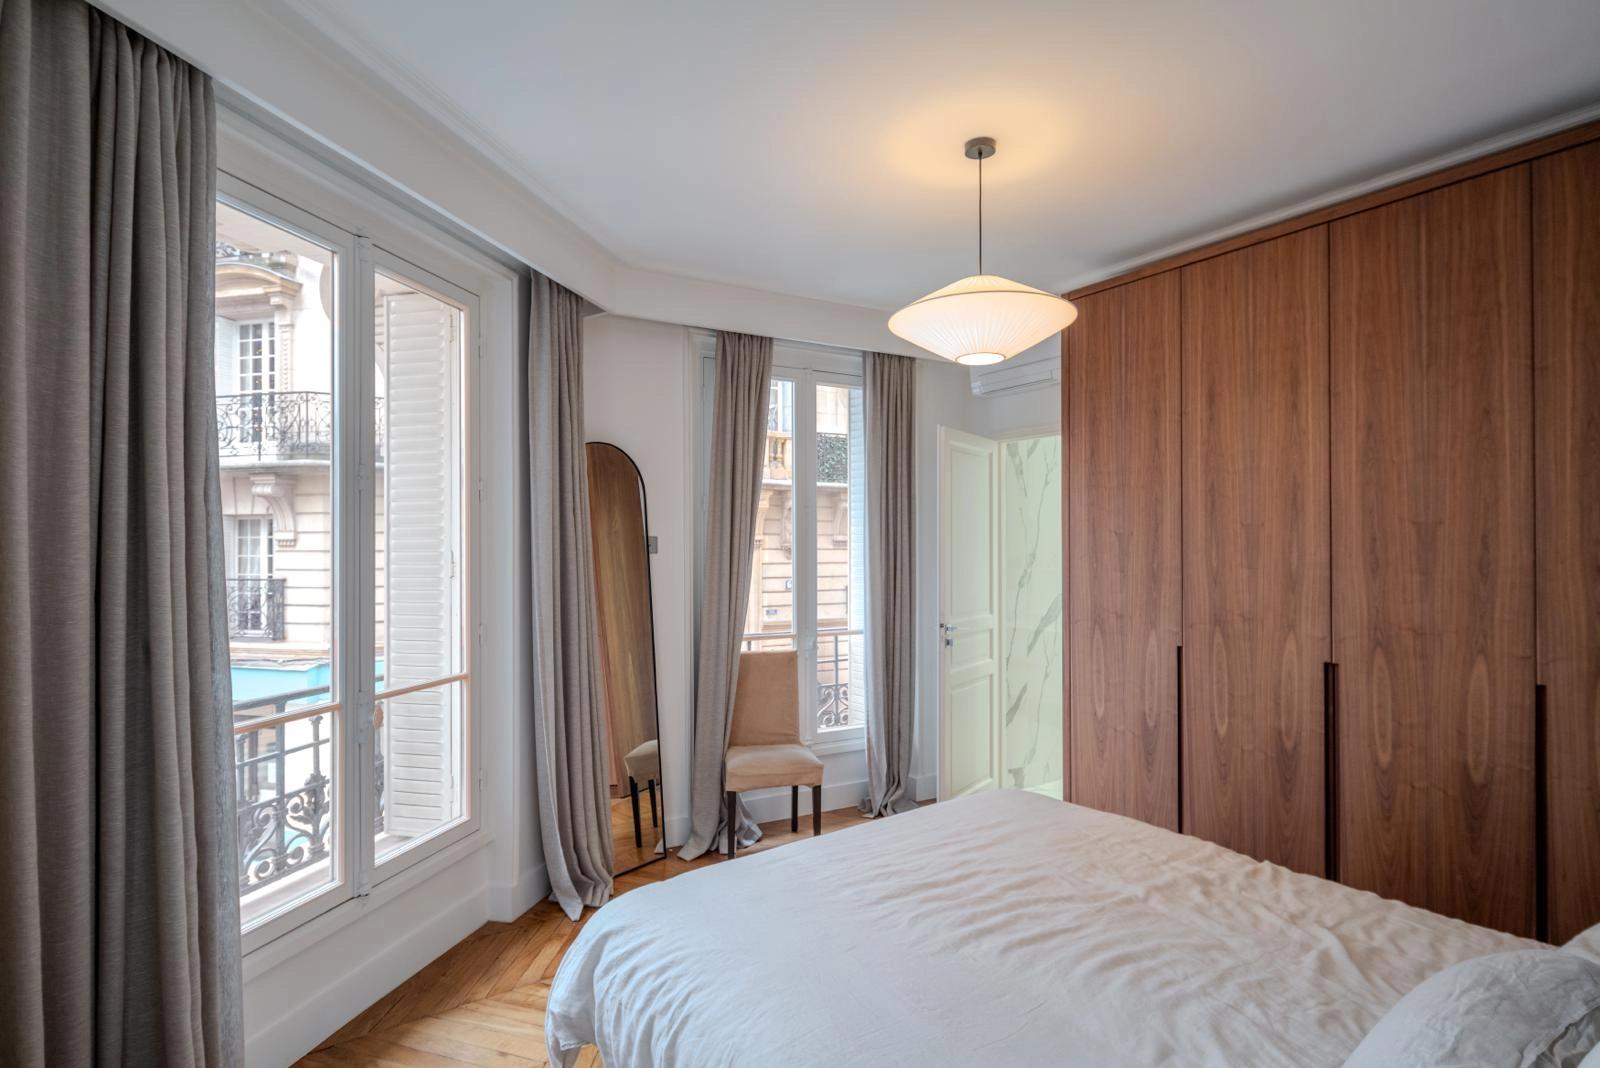 Space Modern apartment 4min from Arc de Triomphe - 3